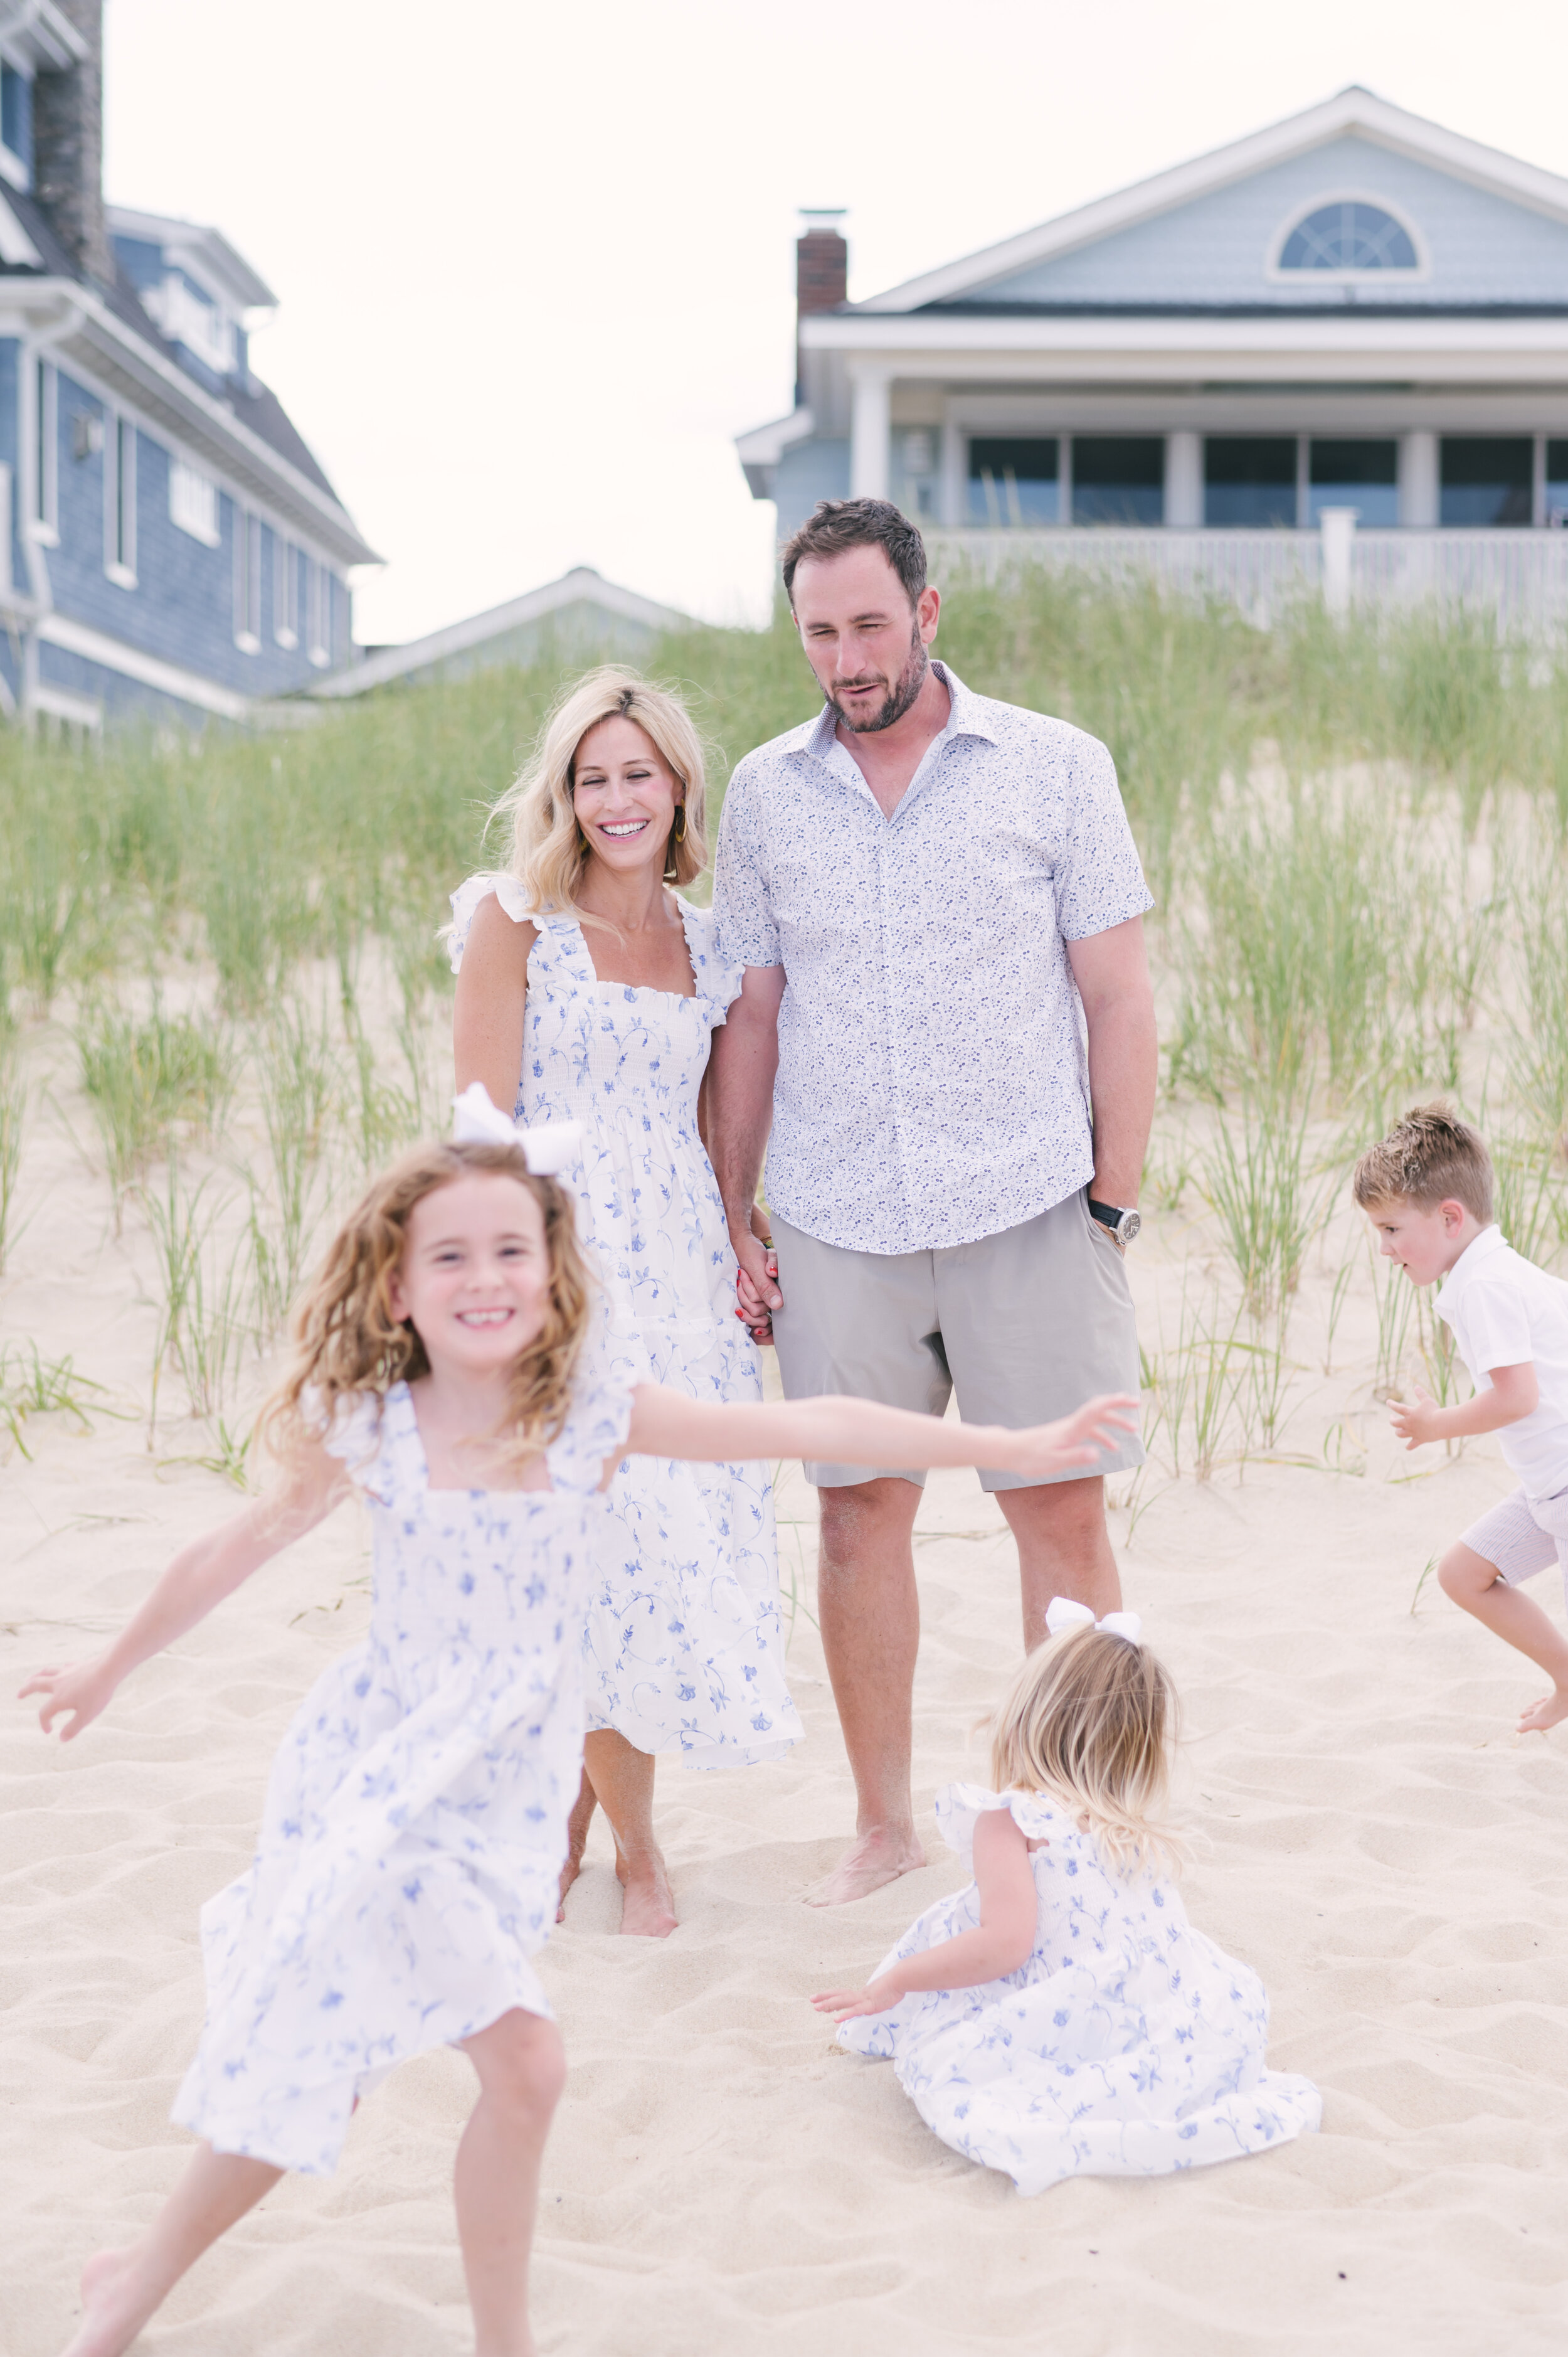 Kids playing during family photos on beach while parents look on  | NKB Photo